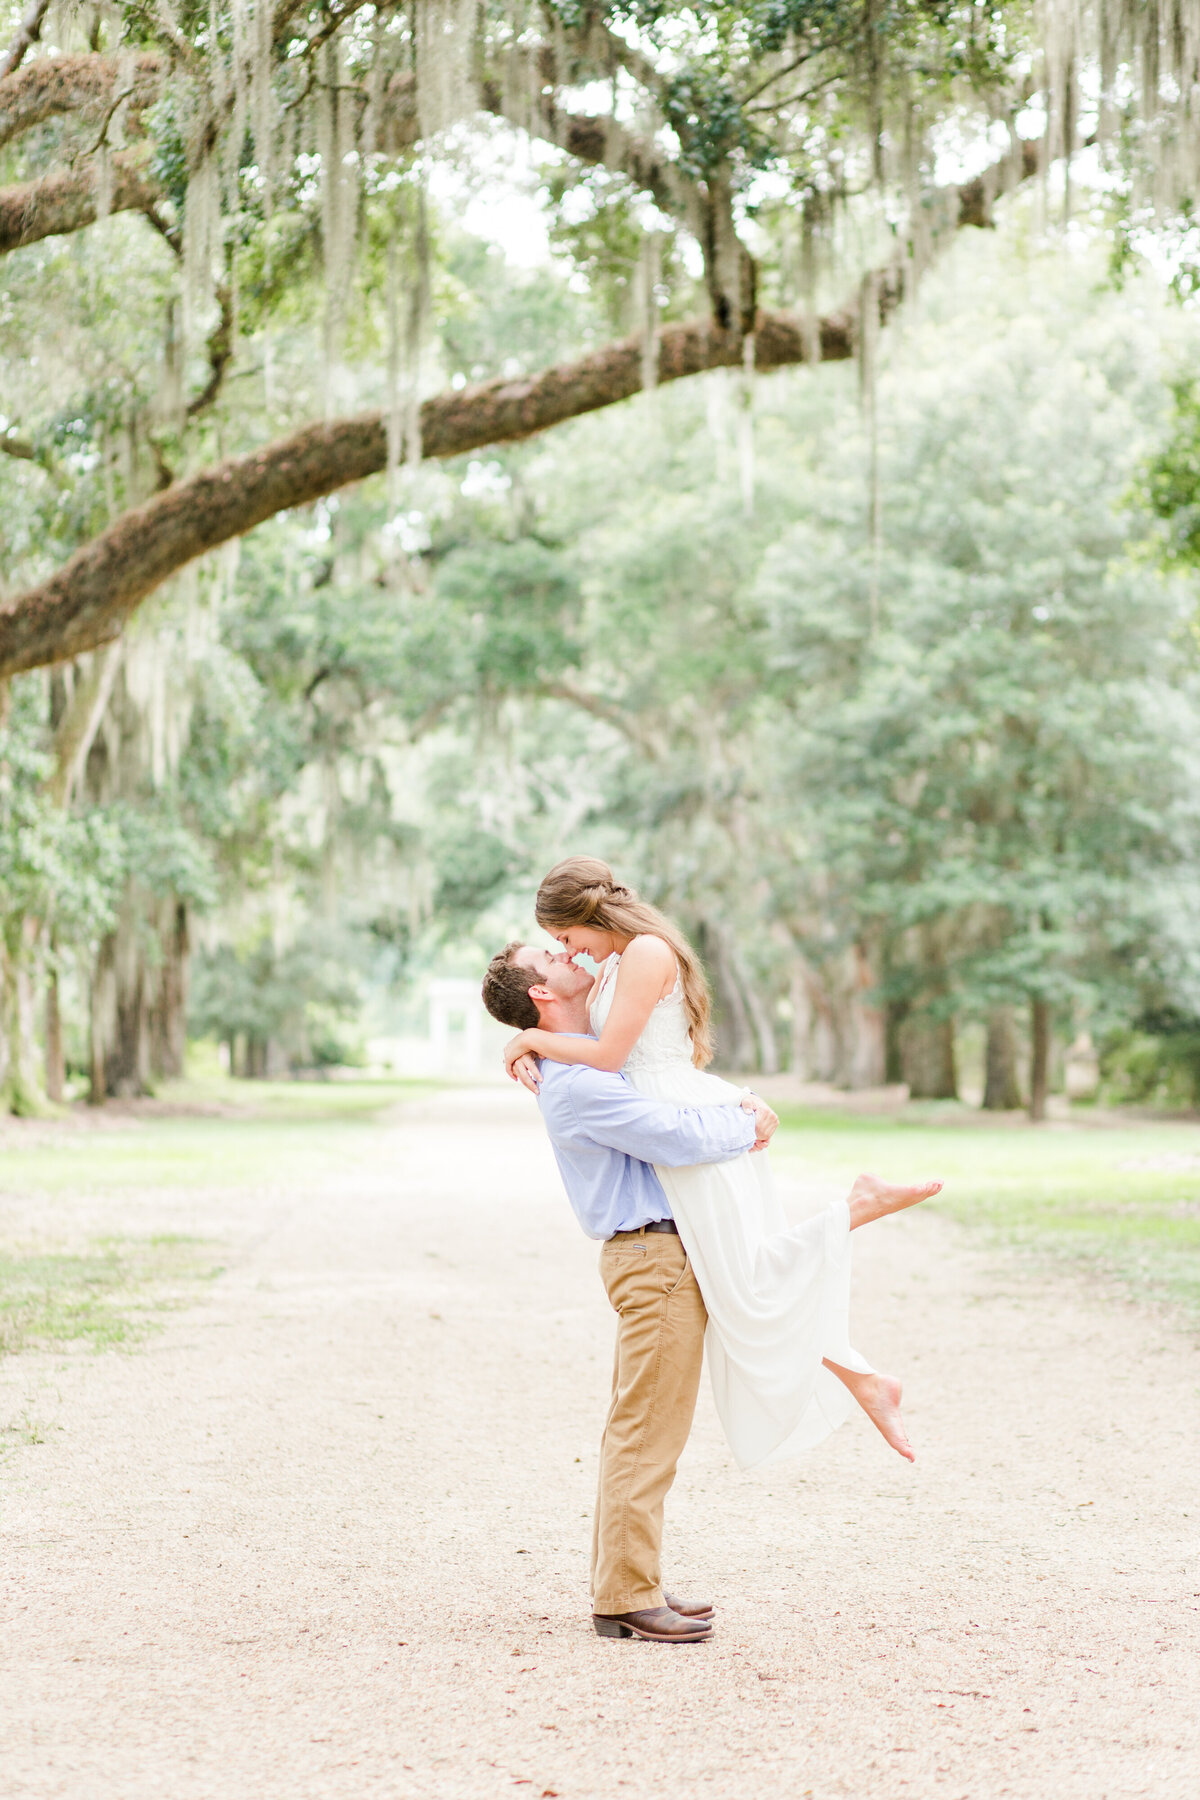 Renee Lorio Photography South Louisiana Wedding Engagement Light Airy Portrait Photographer Photos Southern Clean Colorful9